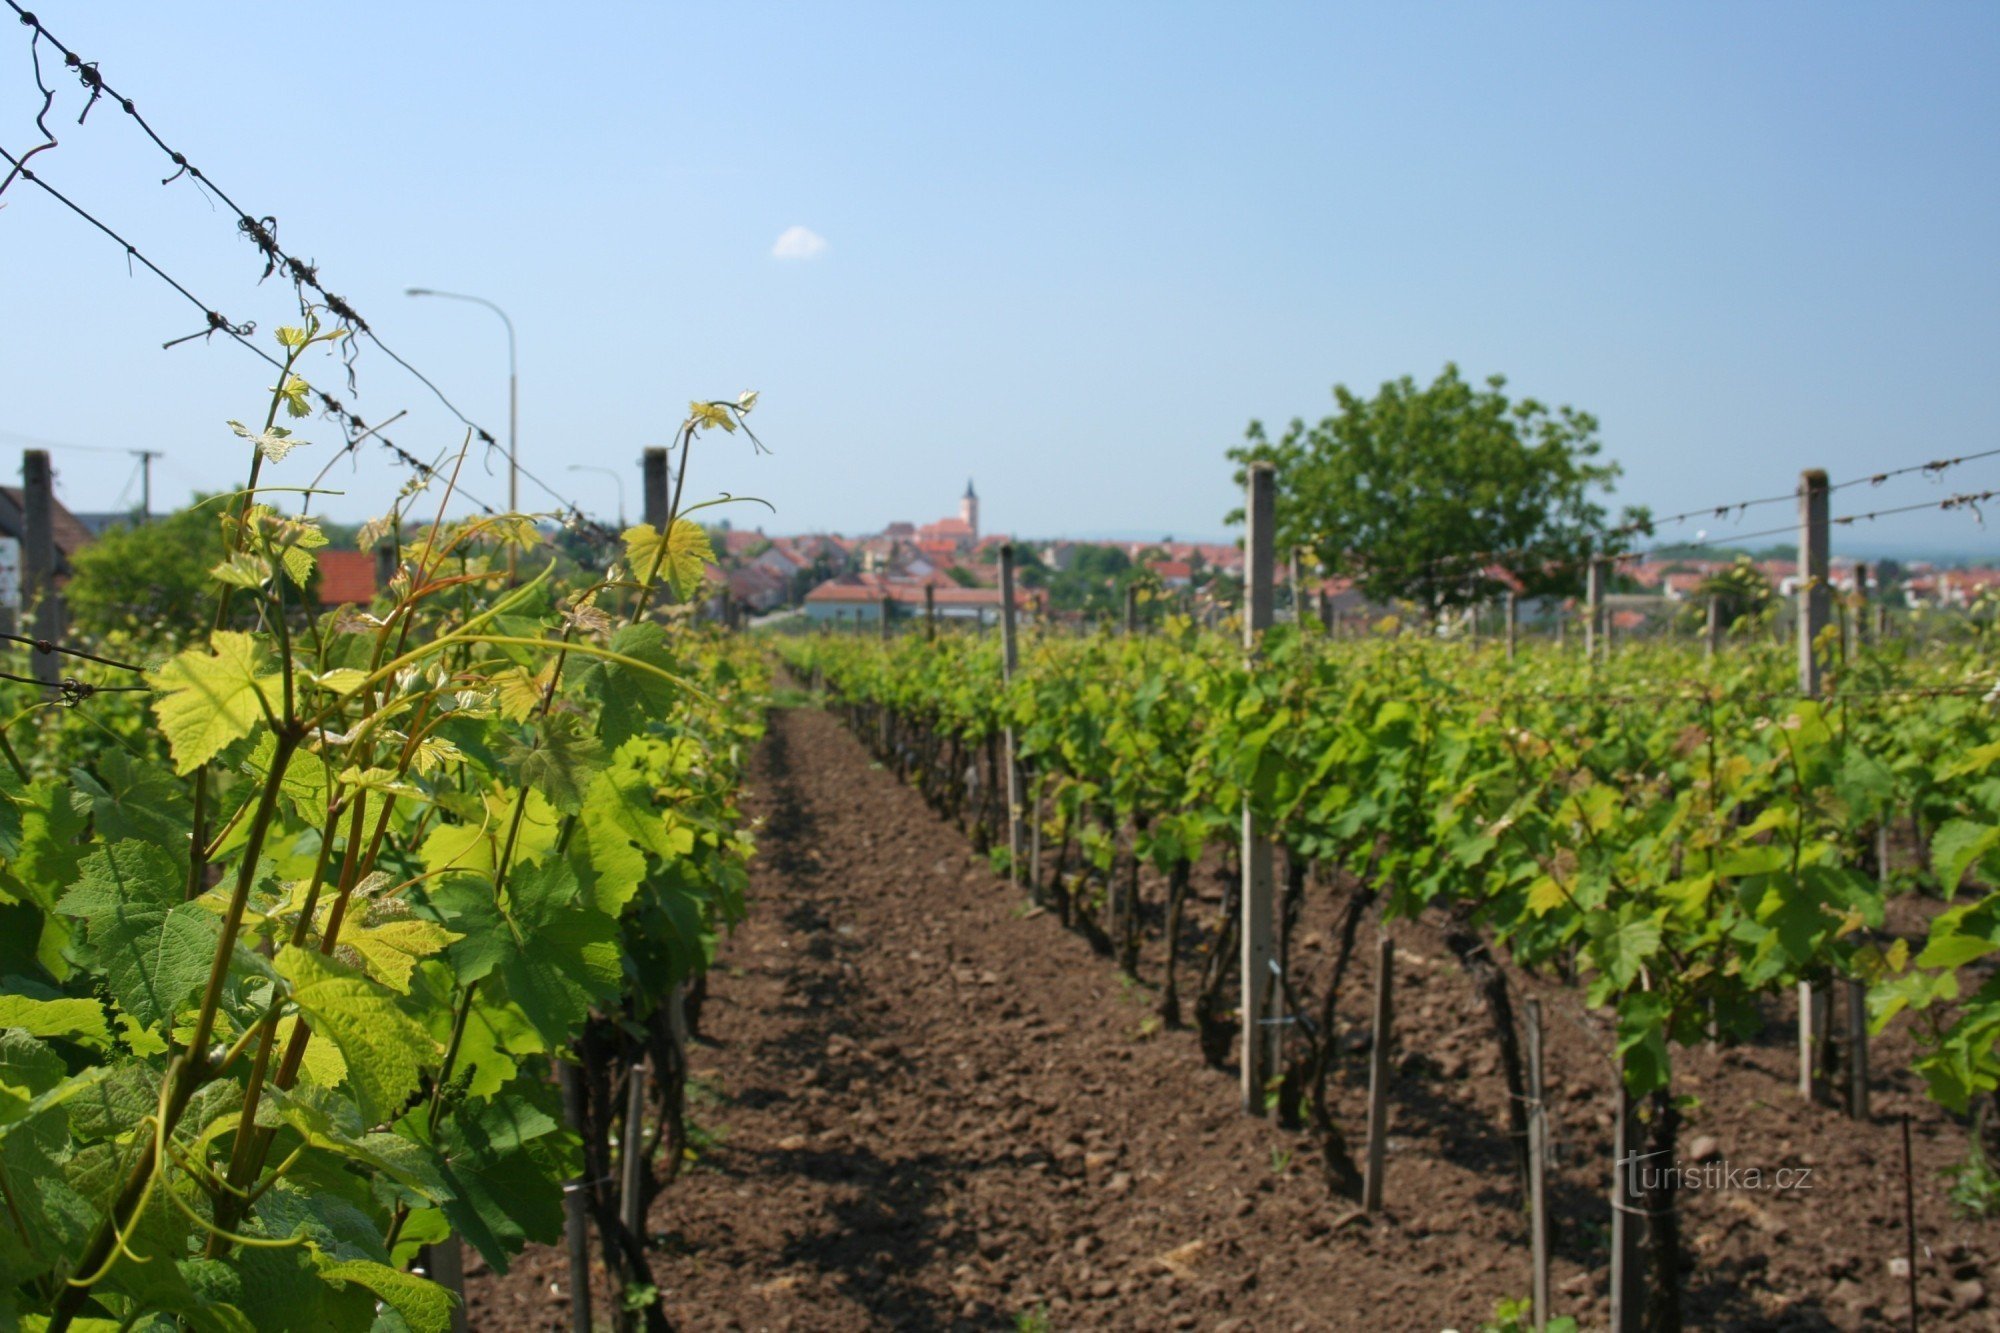 Velké Bílovice - view of the town from the vineyards